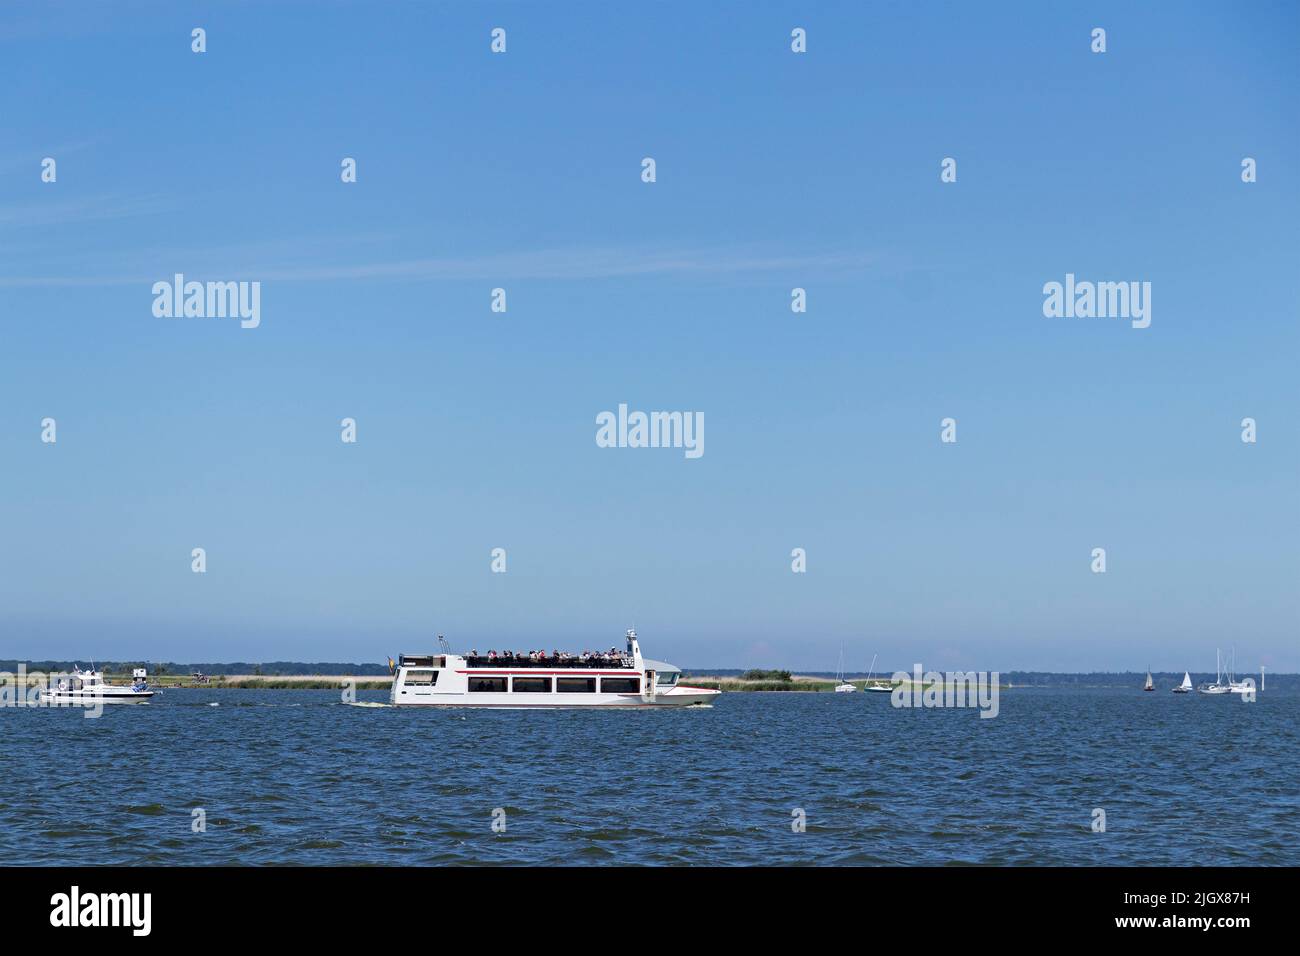 Excursion boat and other boats, Wustrow, Saaler Bodden, Mecklenburg-West Pomerania, Germany Stock Photo